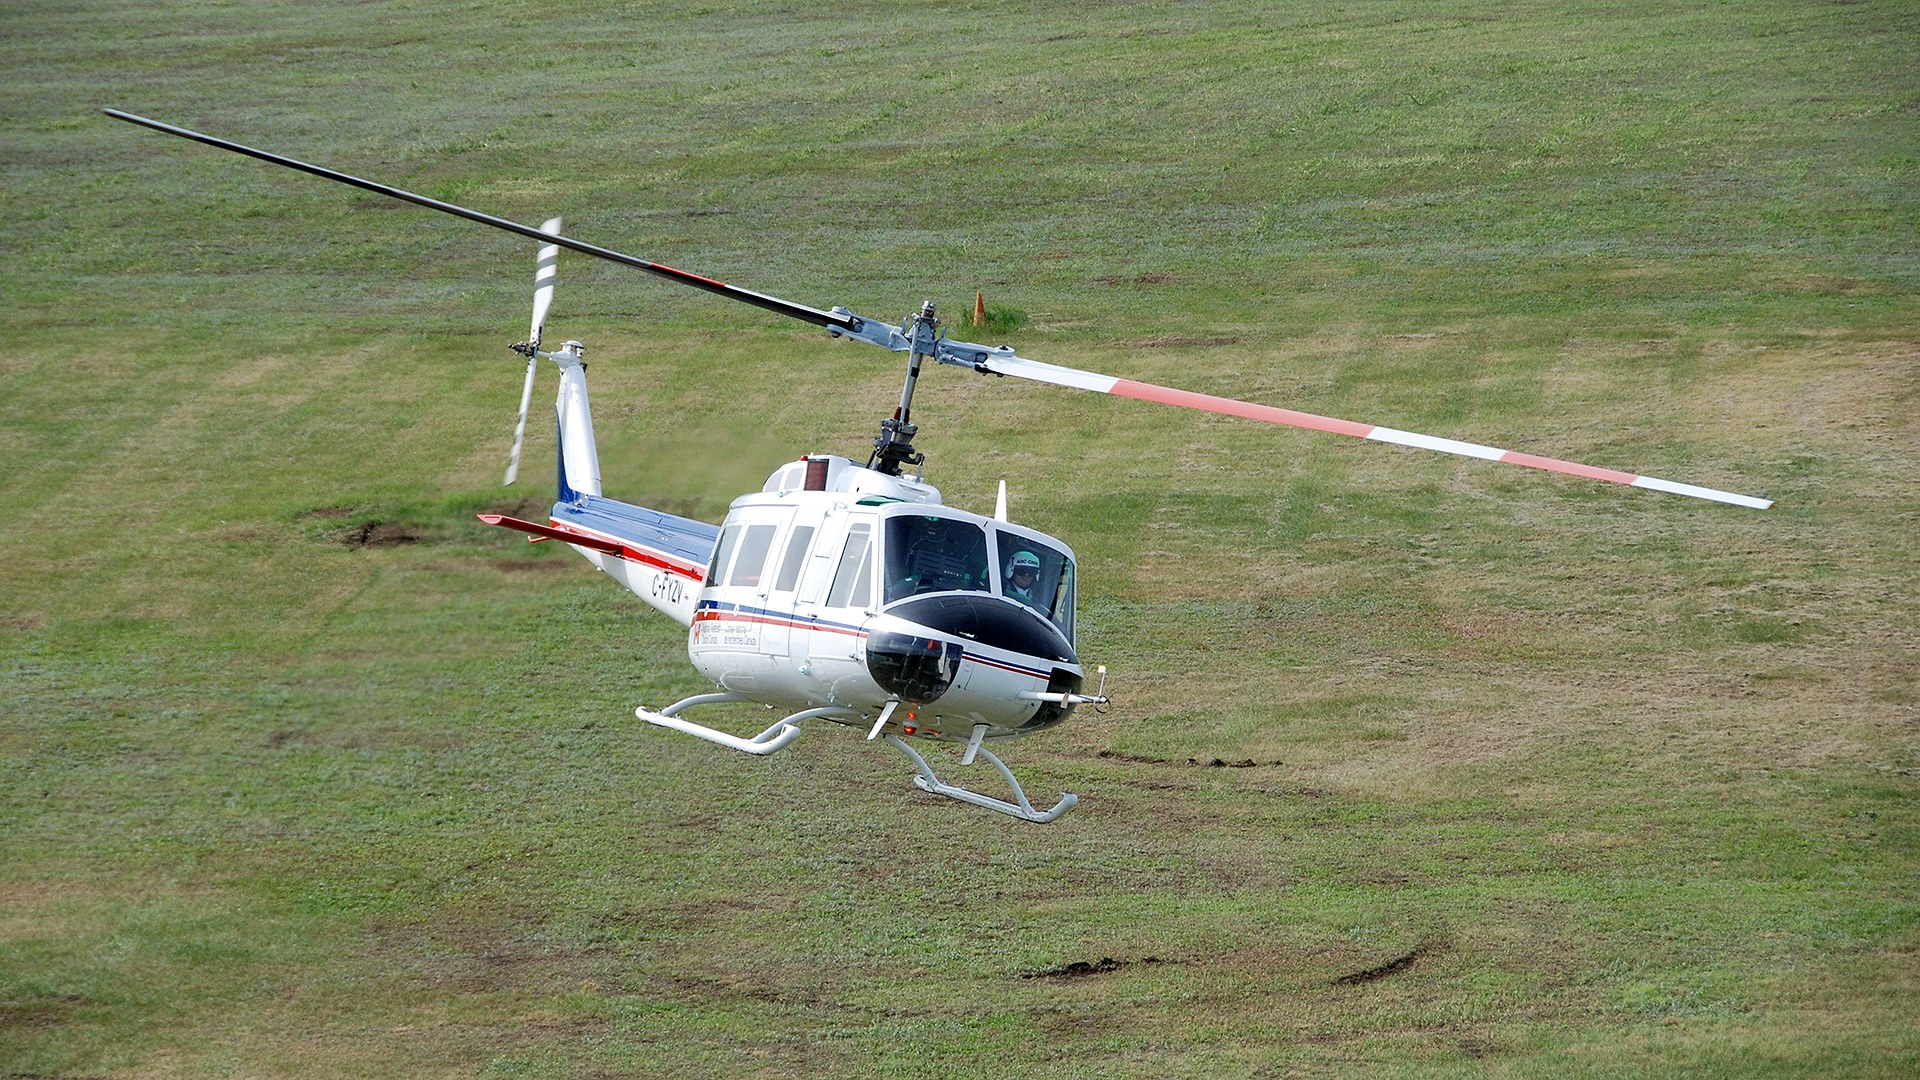 NRC Bell 205 helicopter